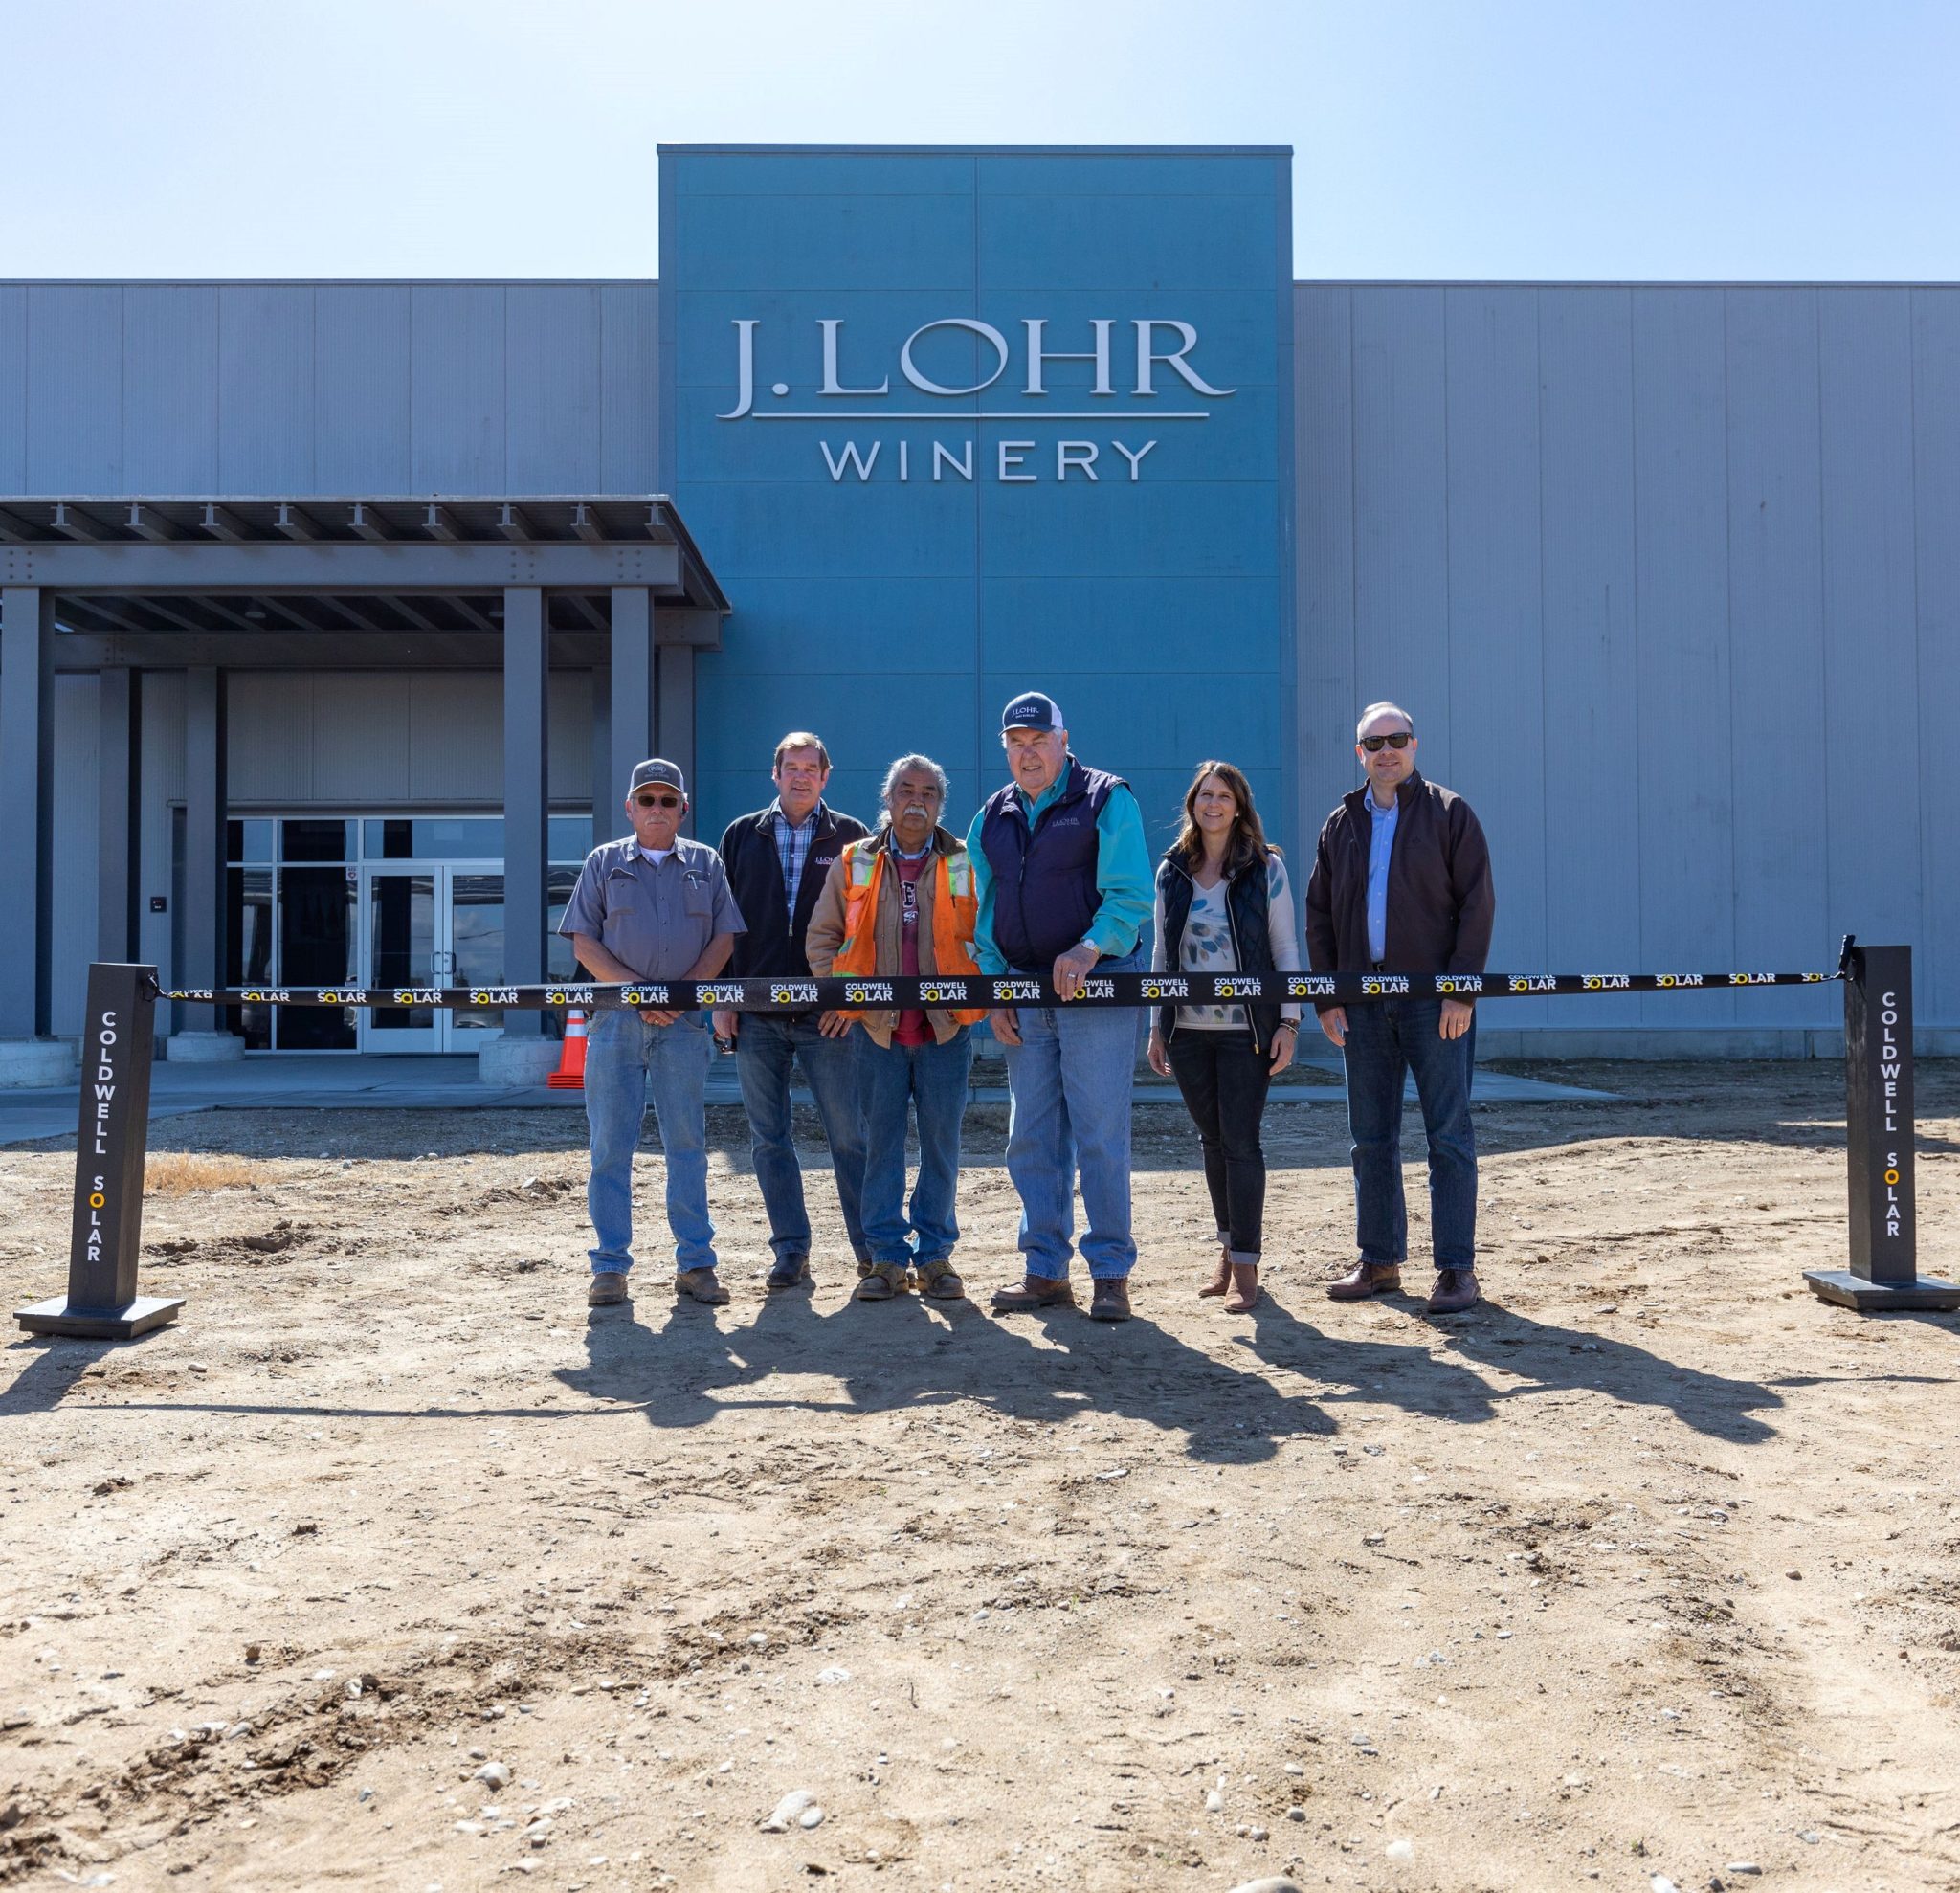 Employees of J Lohr Vineyards standing in front of their winery at the ribbon cutting ceremony for their new solar installation.